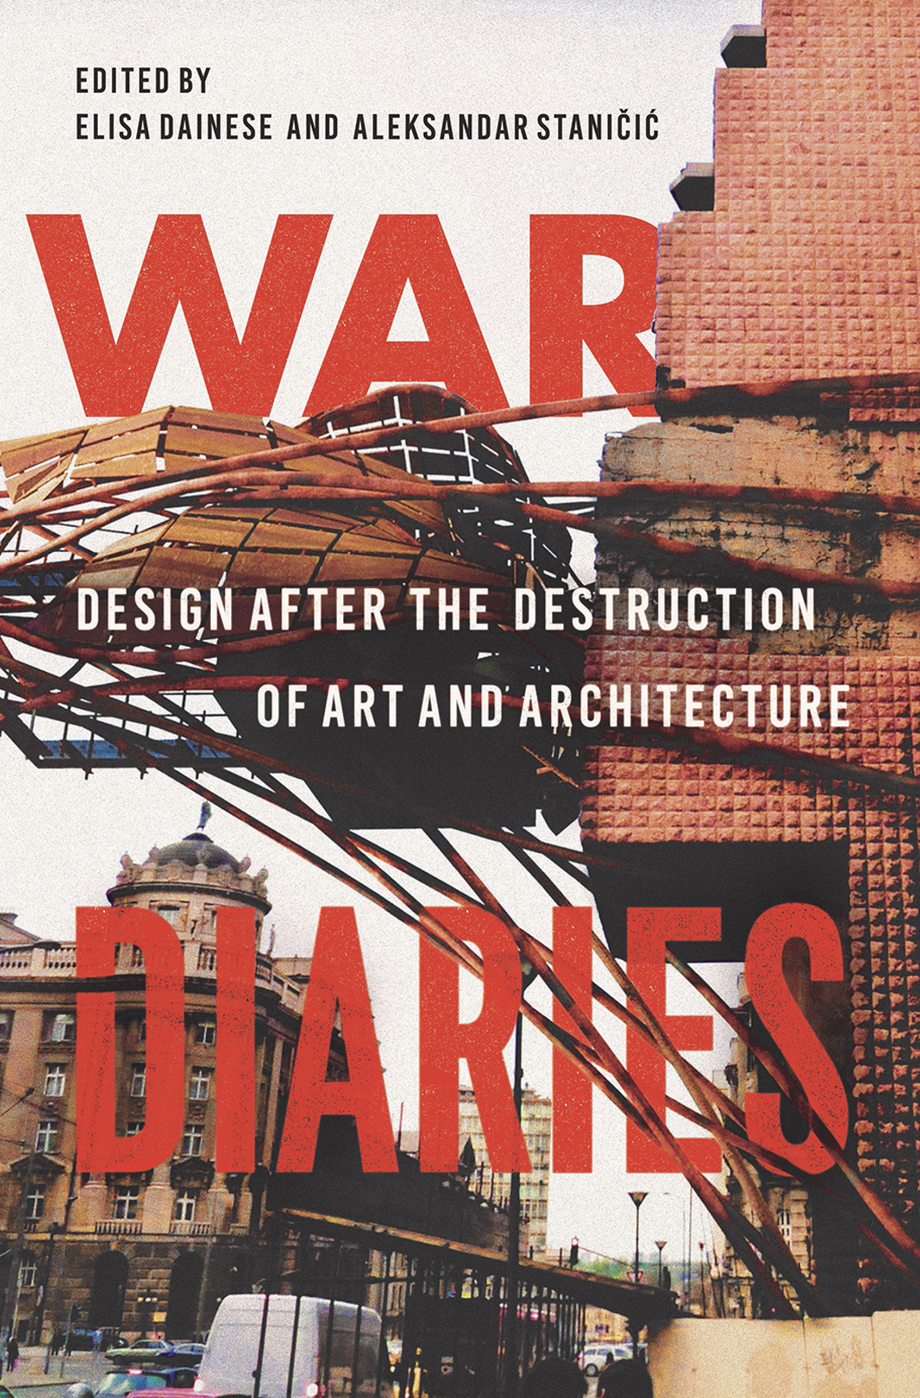 The cover art for War Diaries.